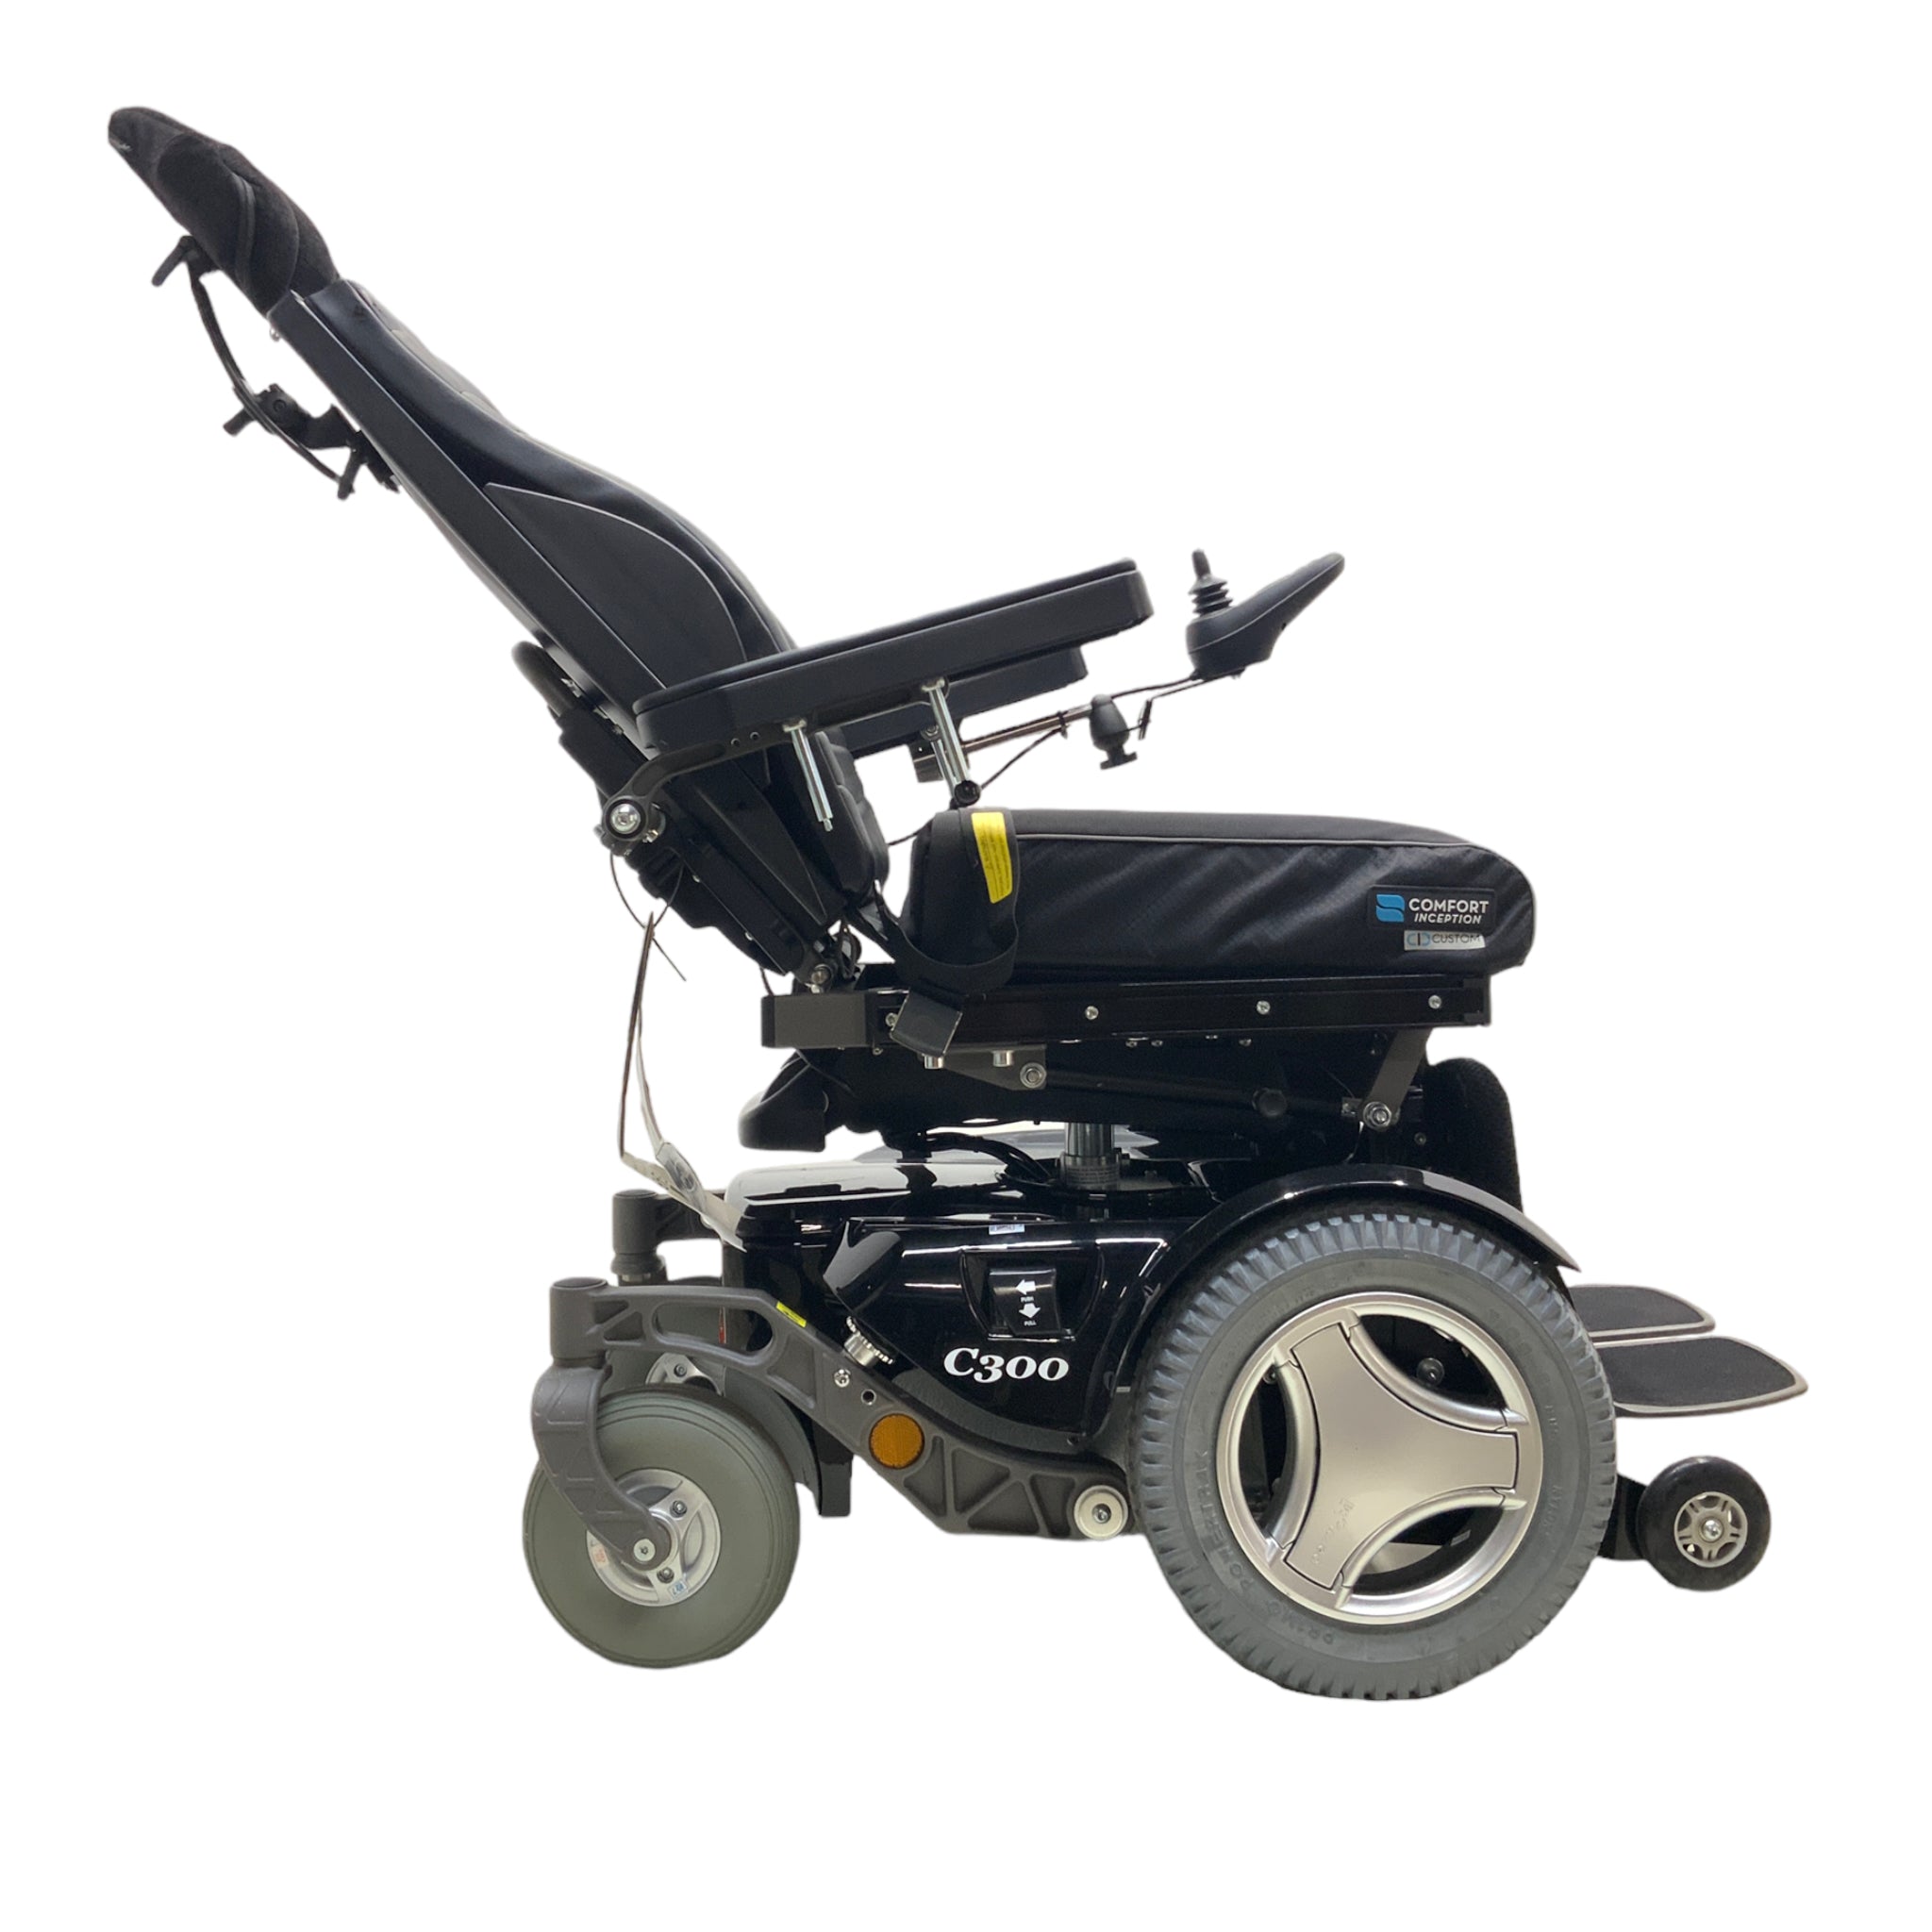 Wheelchair Seat Cushions - Better Mobility - Wheelchairs